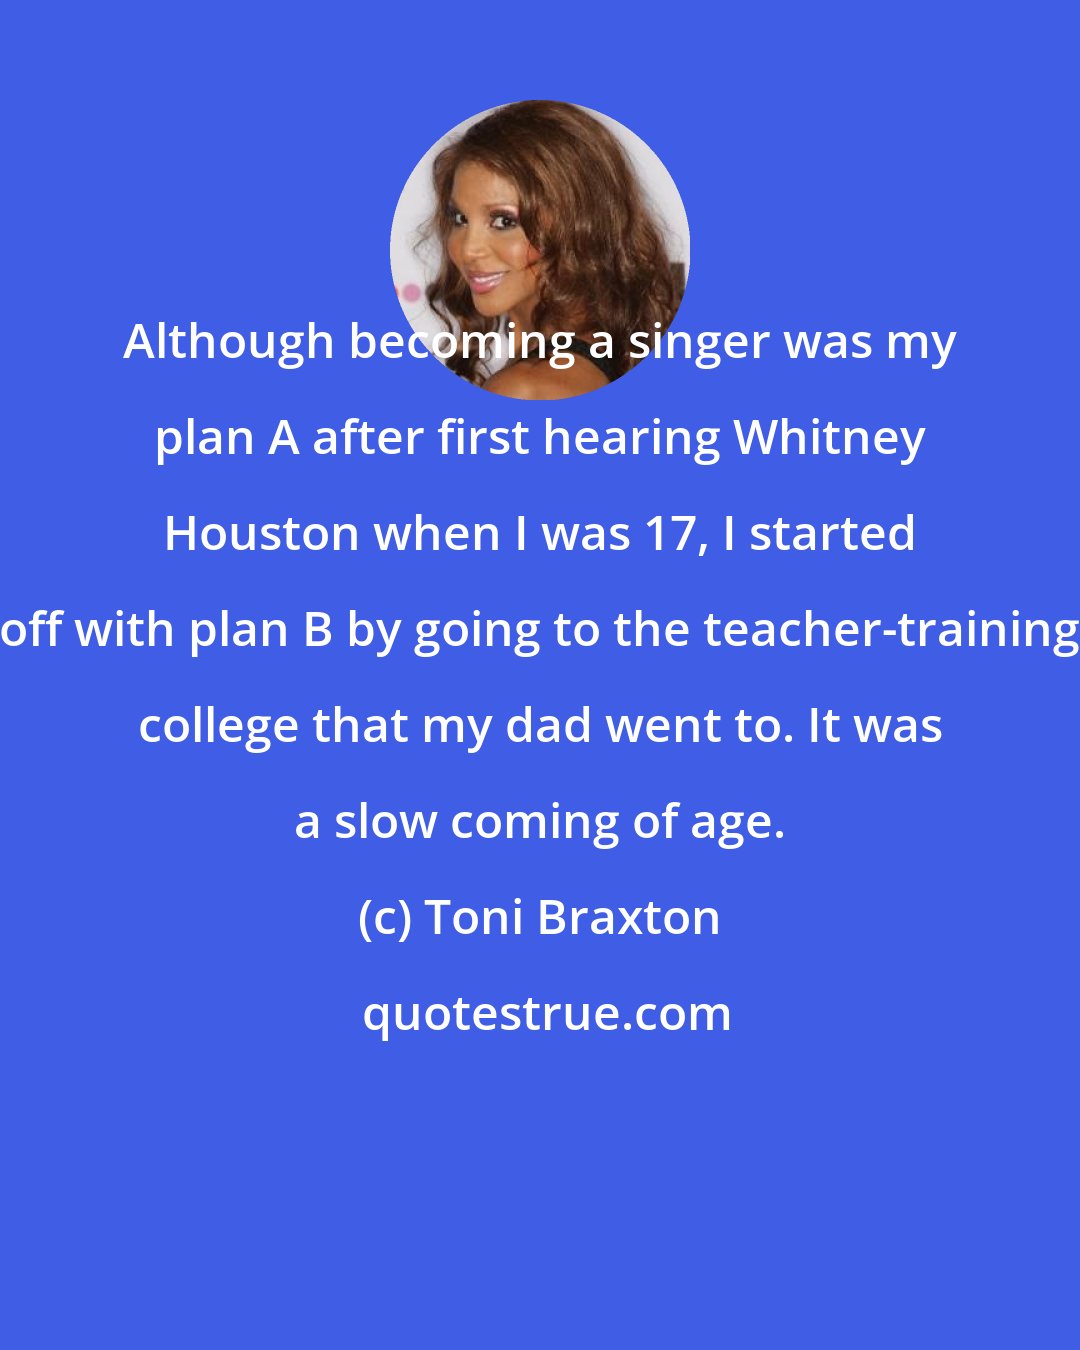 Toni Braxton: Although becoming a singer was my plan A after first hearing Whitney Houston when I was 17, I started off with plan B by going to the teacher-training college that my dad went to. It was a slow coming of age.